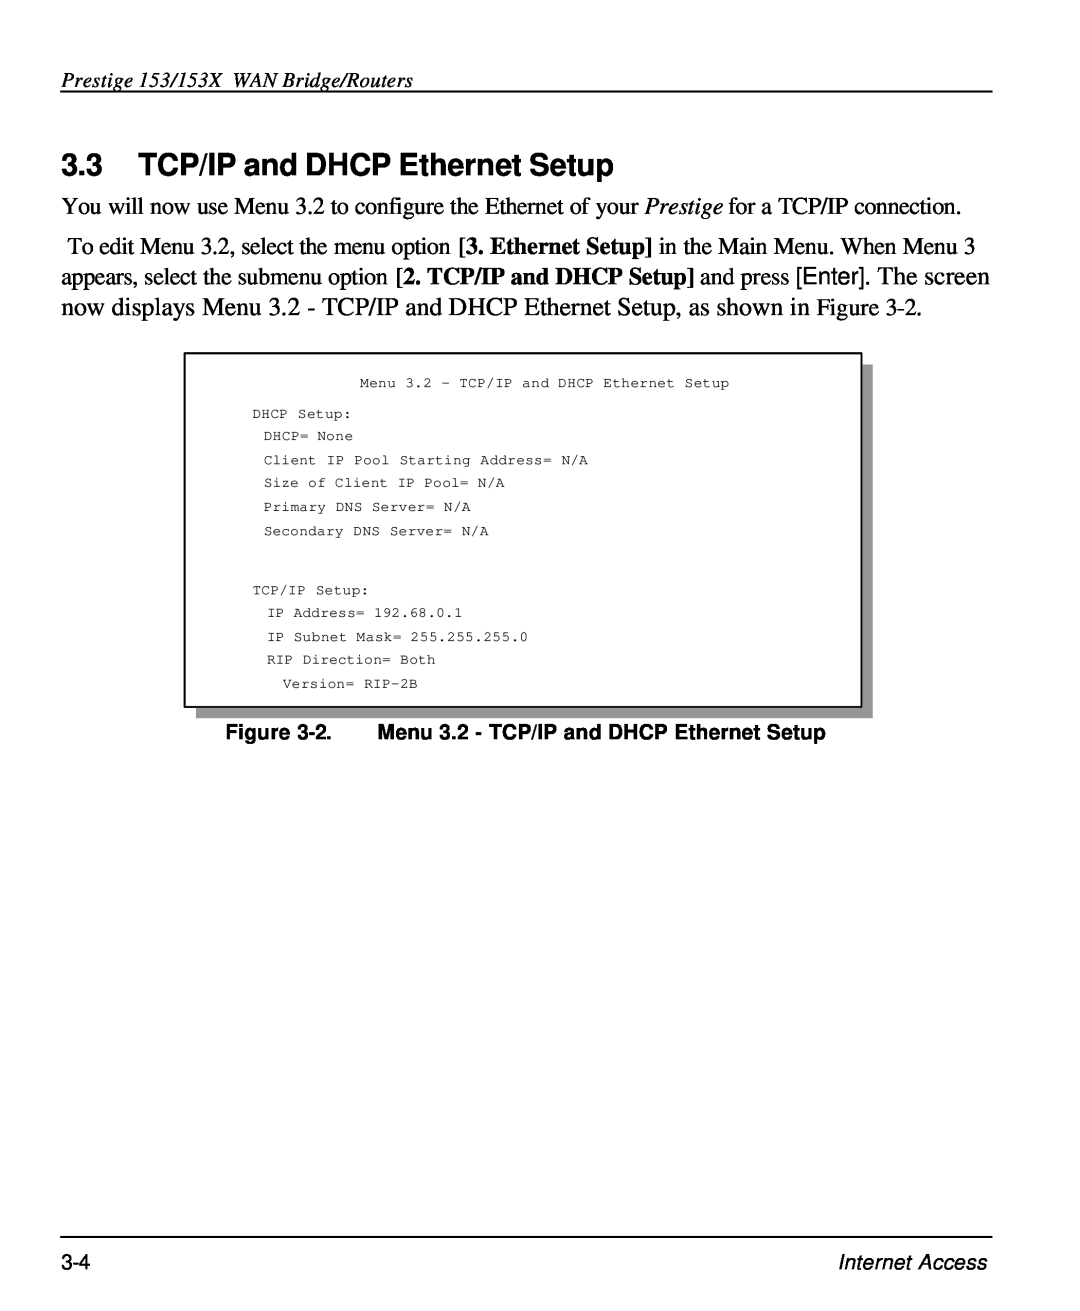 ZyXEL Communications 153X user manual 3.3 TCP/IP and DHCP Ethernet Setup, 2. Menu 3.2 - TCP/IP and DHCP Ethernet Setup 